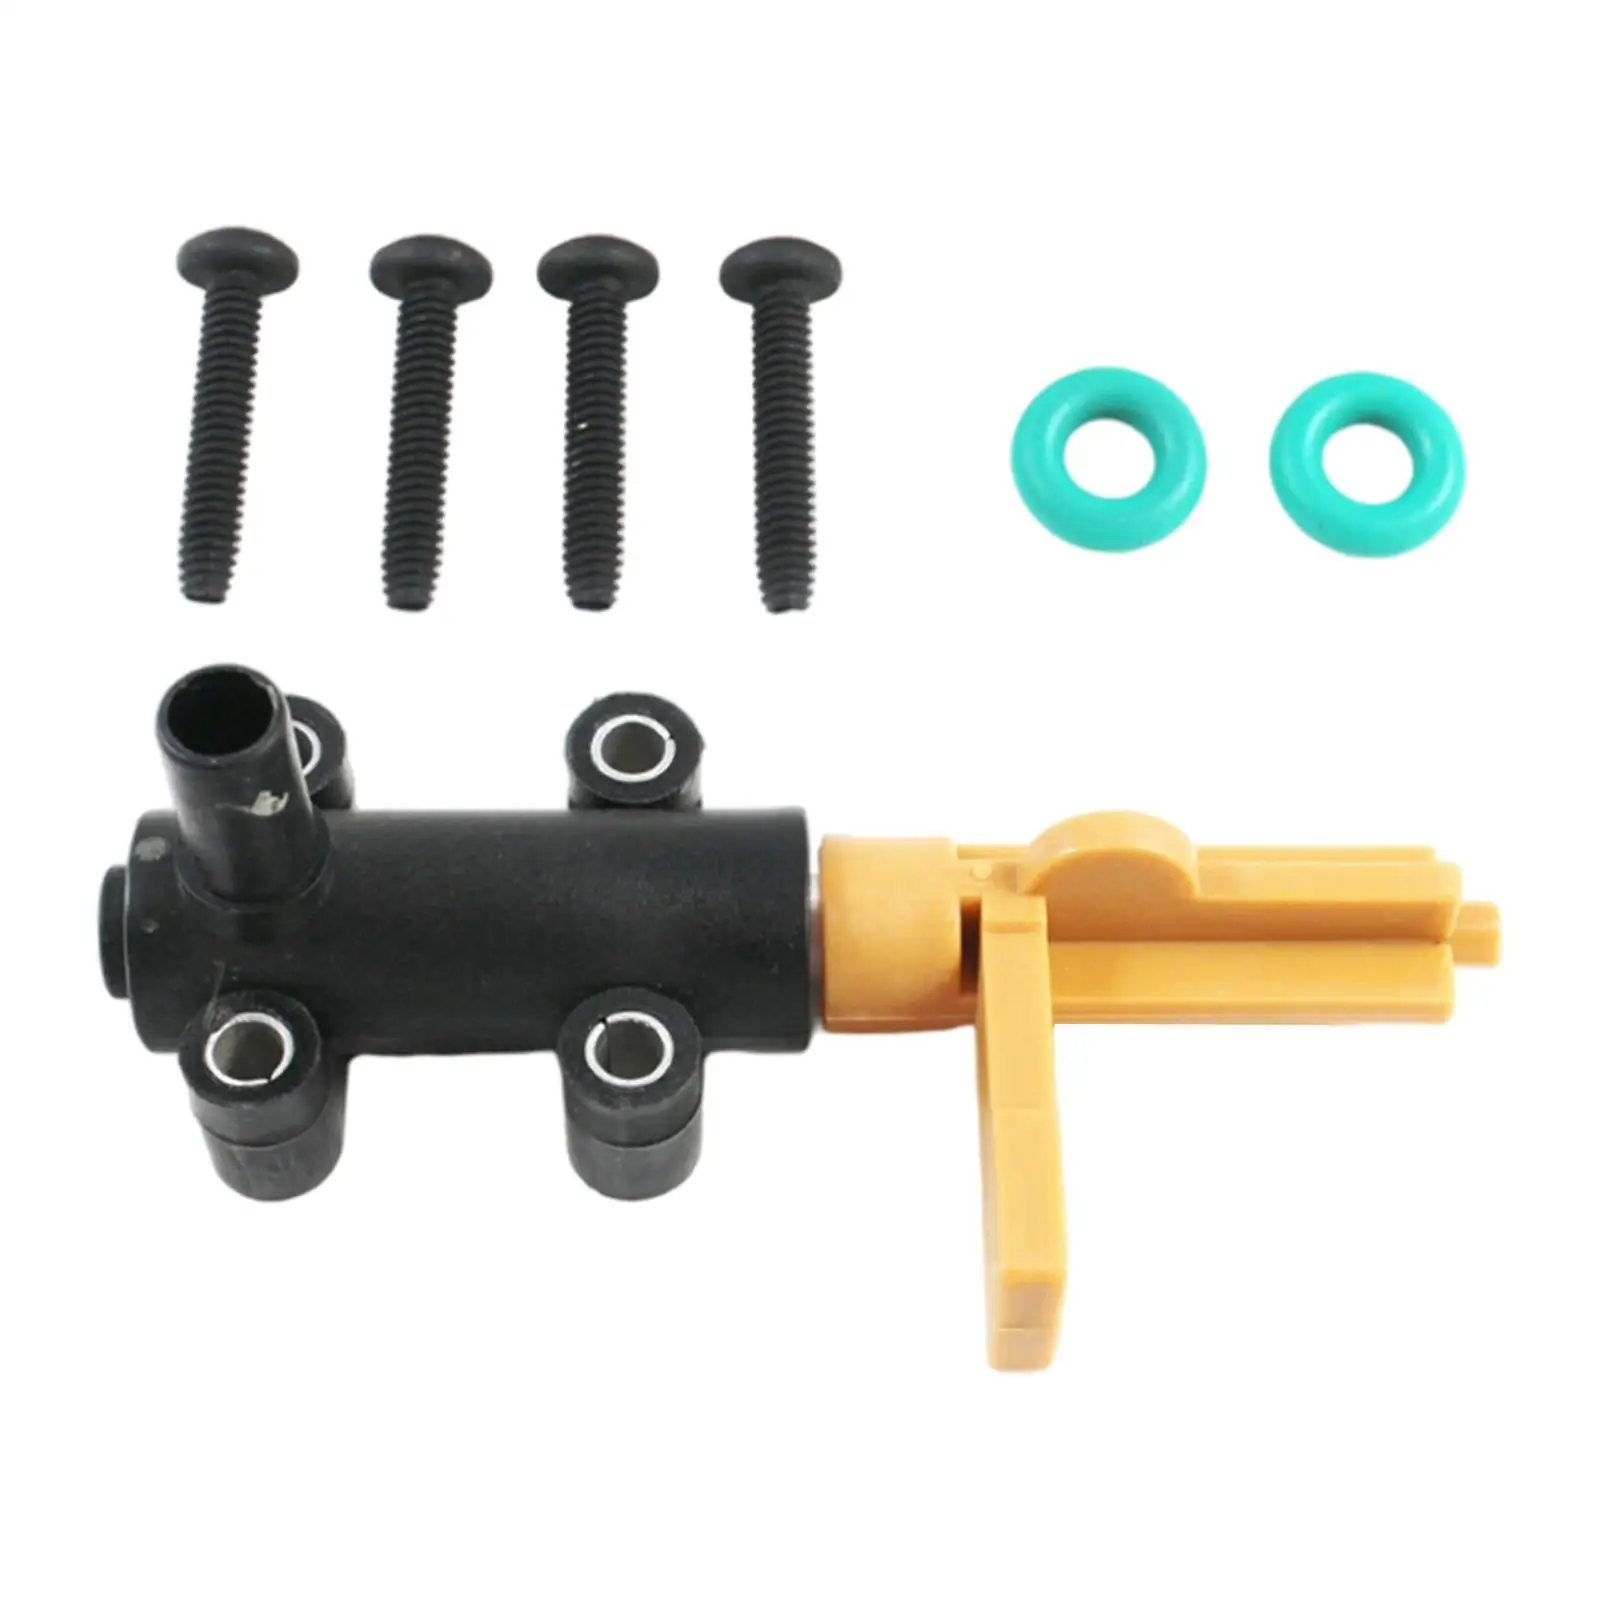 Fuel Water Separator, Engine Parts, Fuel System Replacement Parts Automotive Drain for  Models     904-202